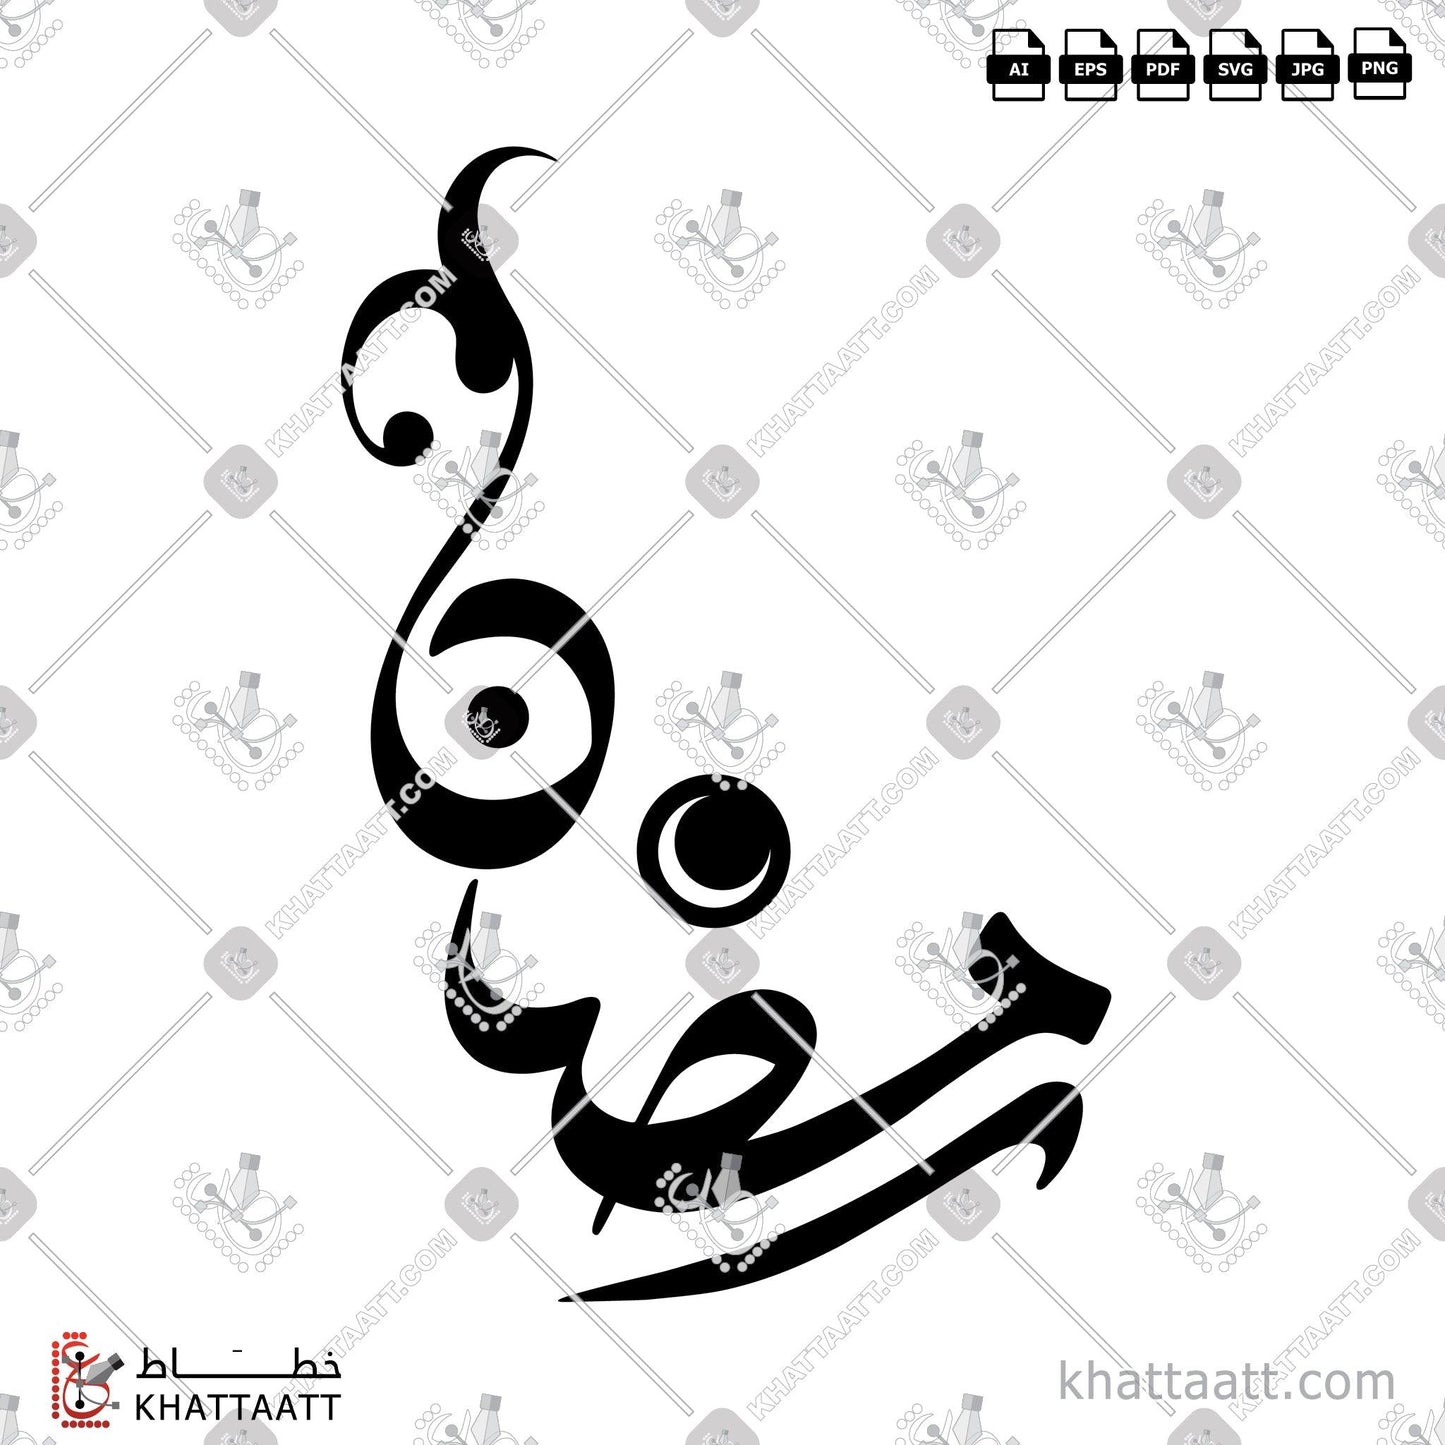 Download Arabic Calligraphy of Ramadan - رمضان in FreeStyle - الخط الحر in vector and .png